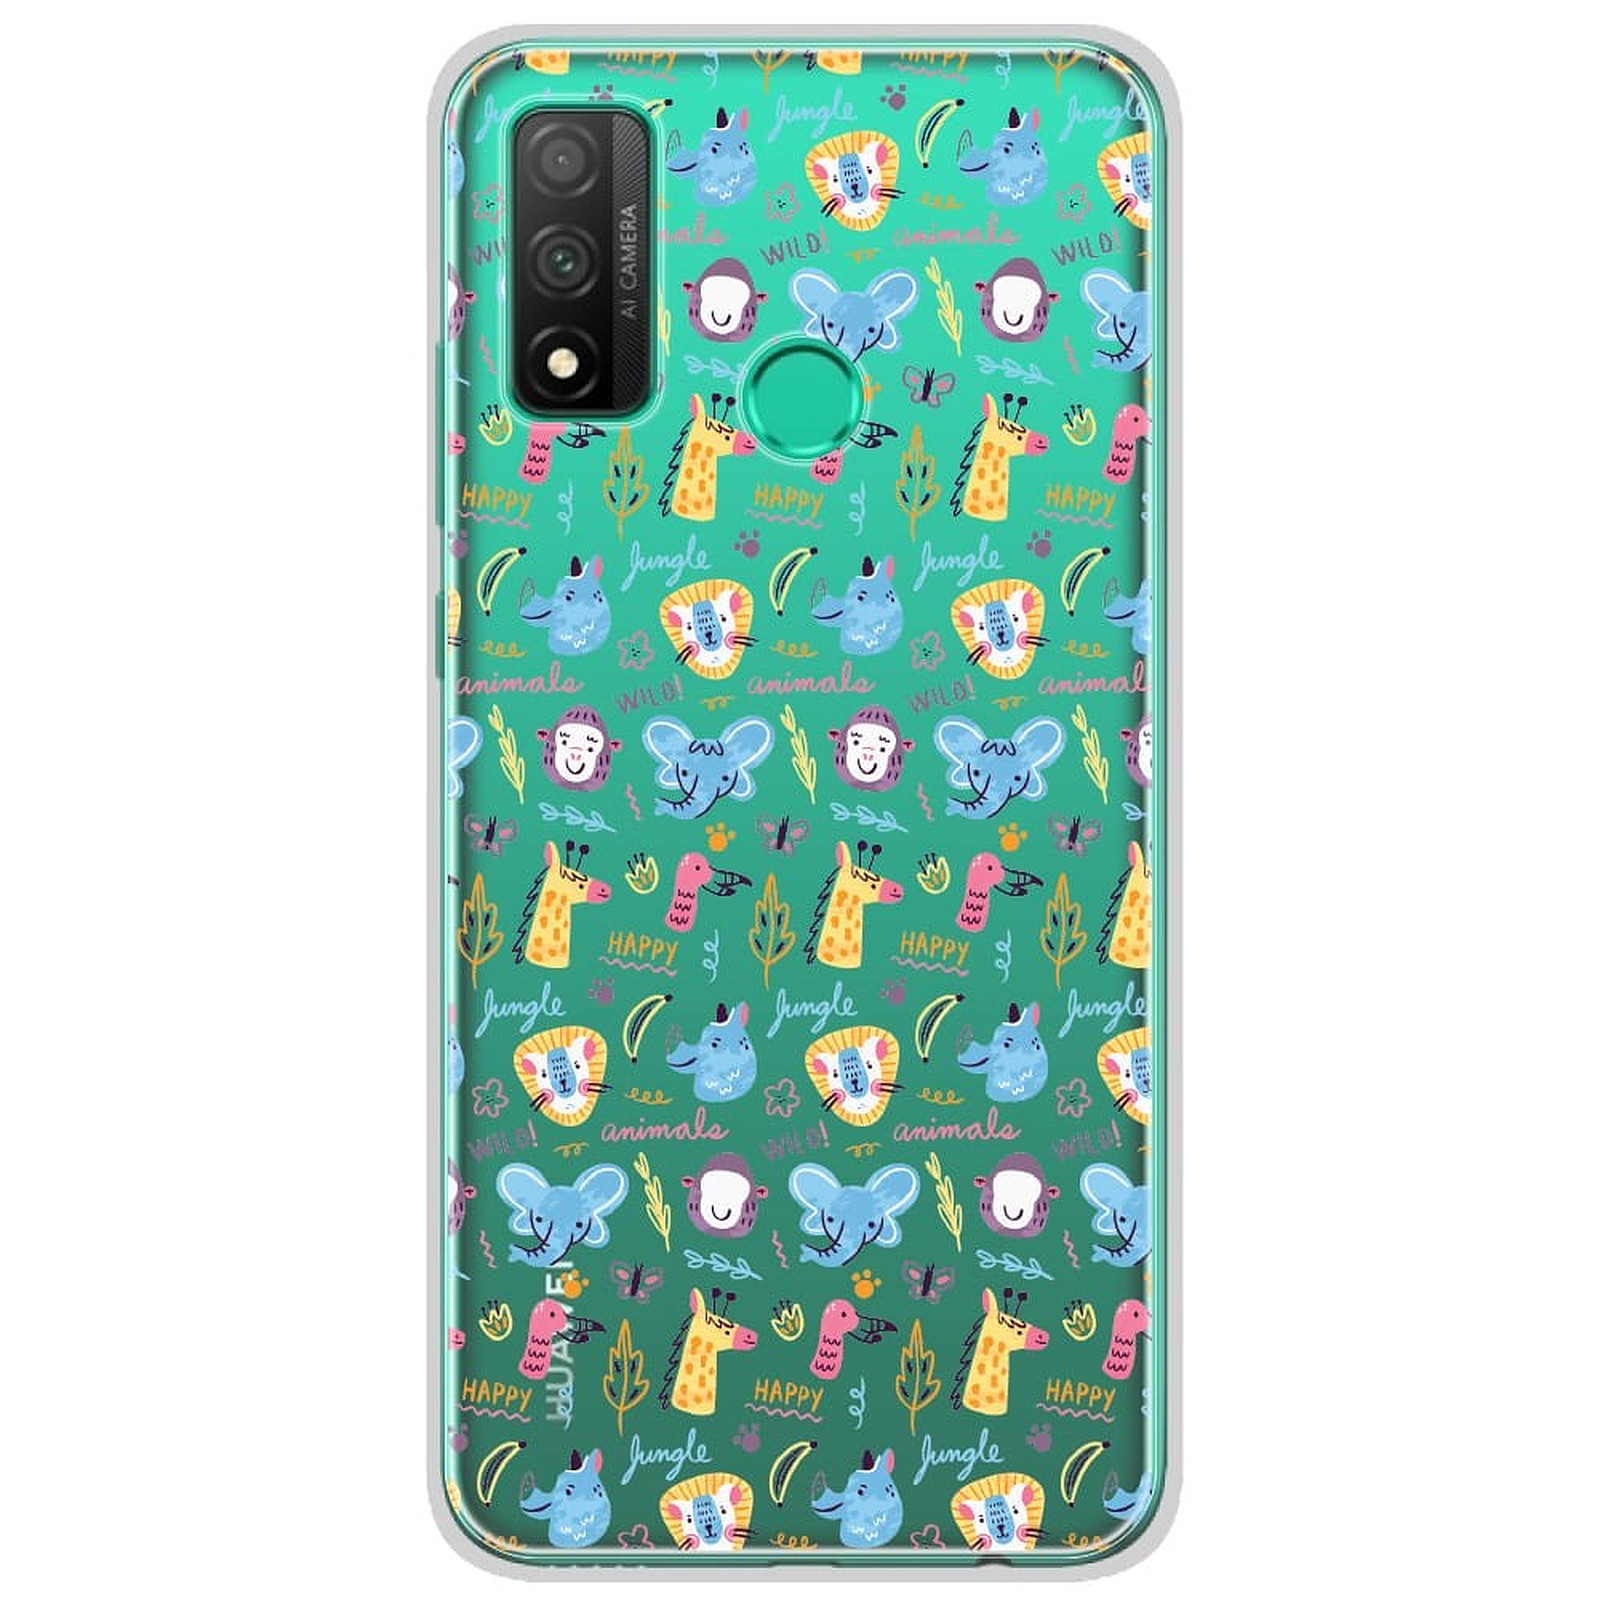 1001 Coques Coque silicone gel Huawei P Smart 2020 motif Happy animals - Coque telephone 1001Coques